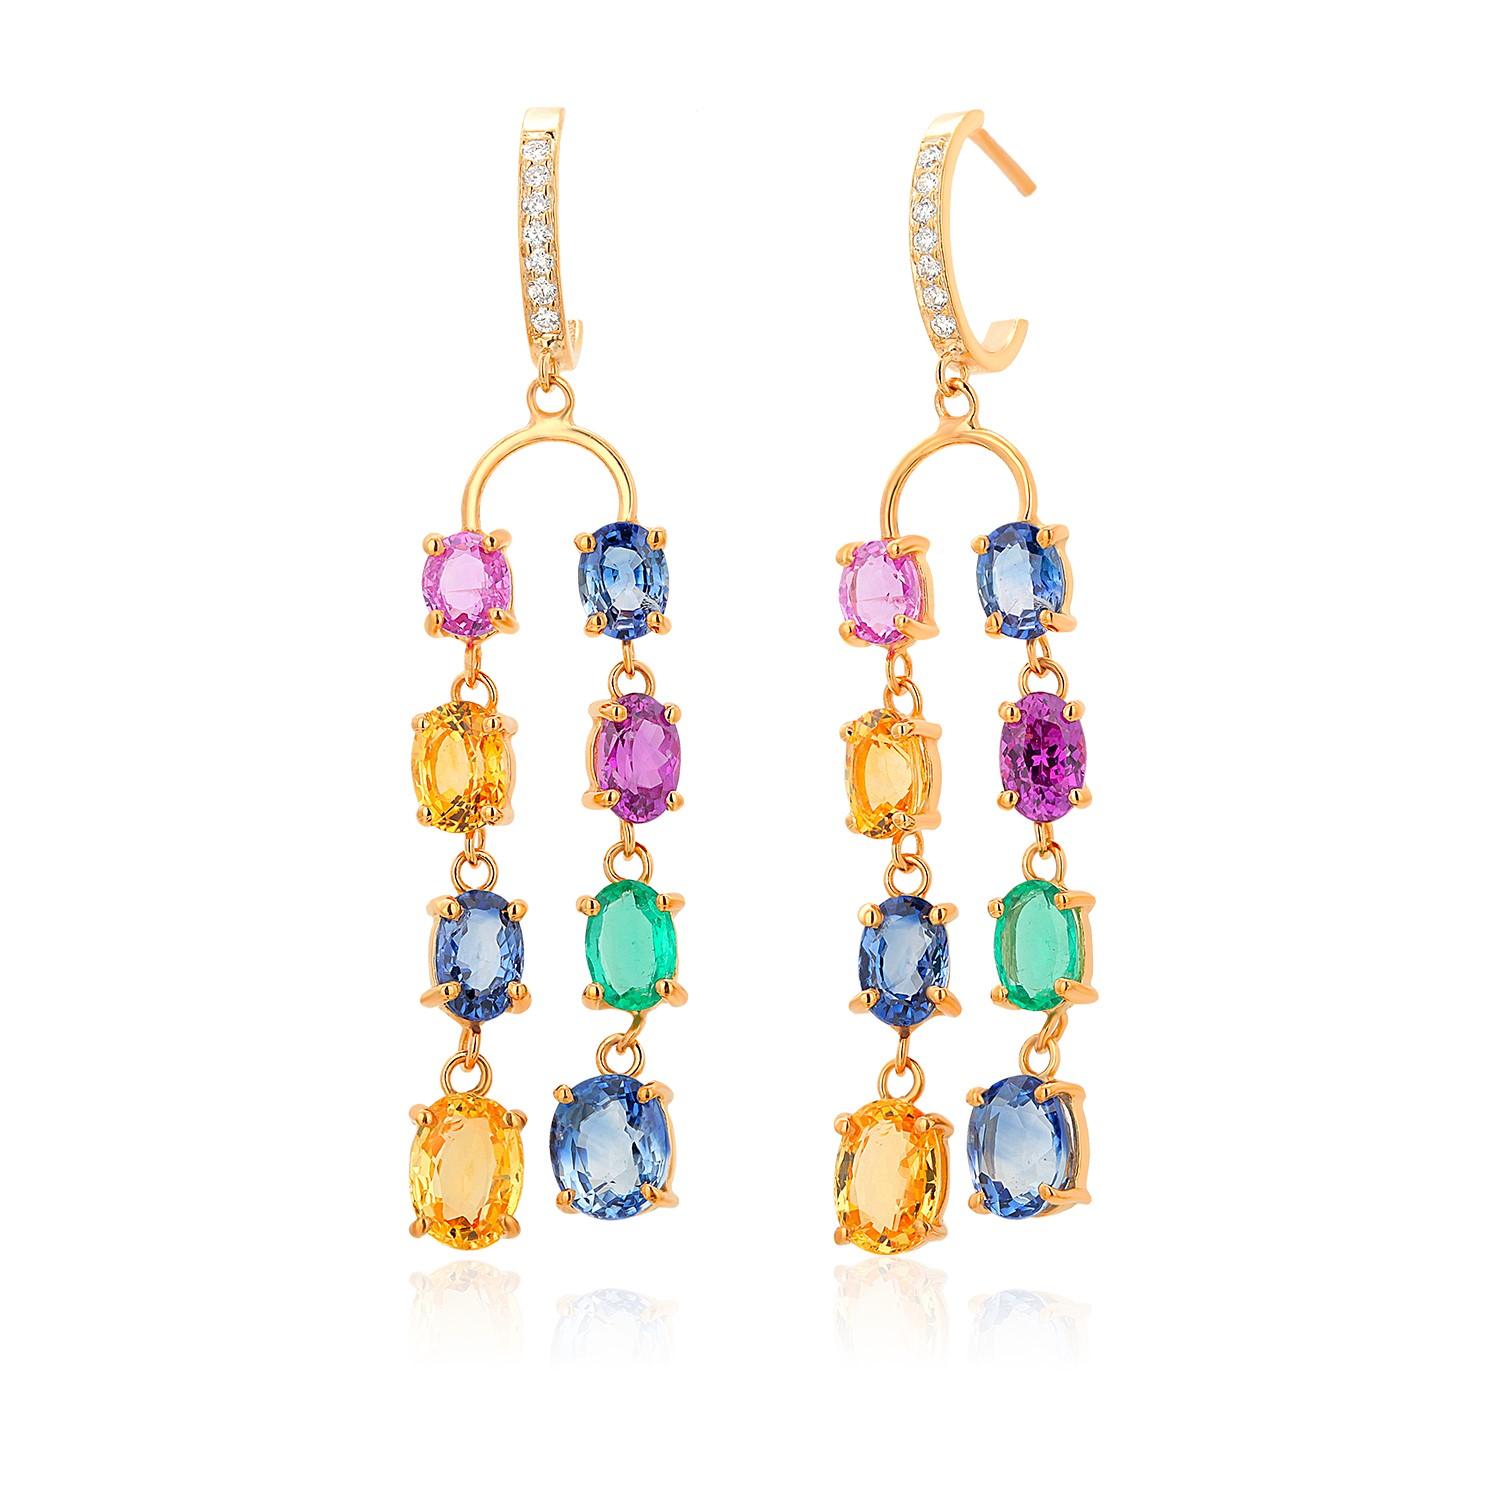 Double Lined Multi-Colorful Precious Stones 11.35 Carat 2 Inch Hoop Earrings For Sale 1